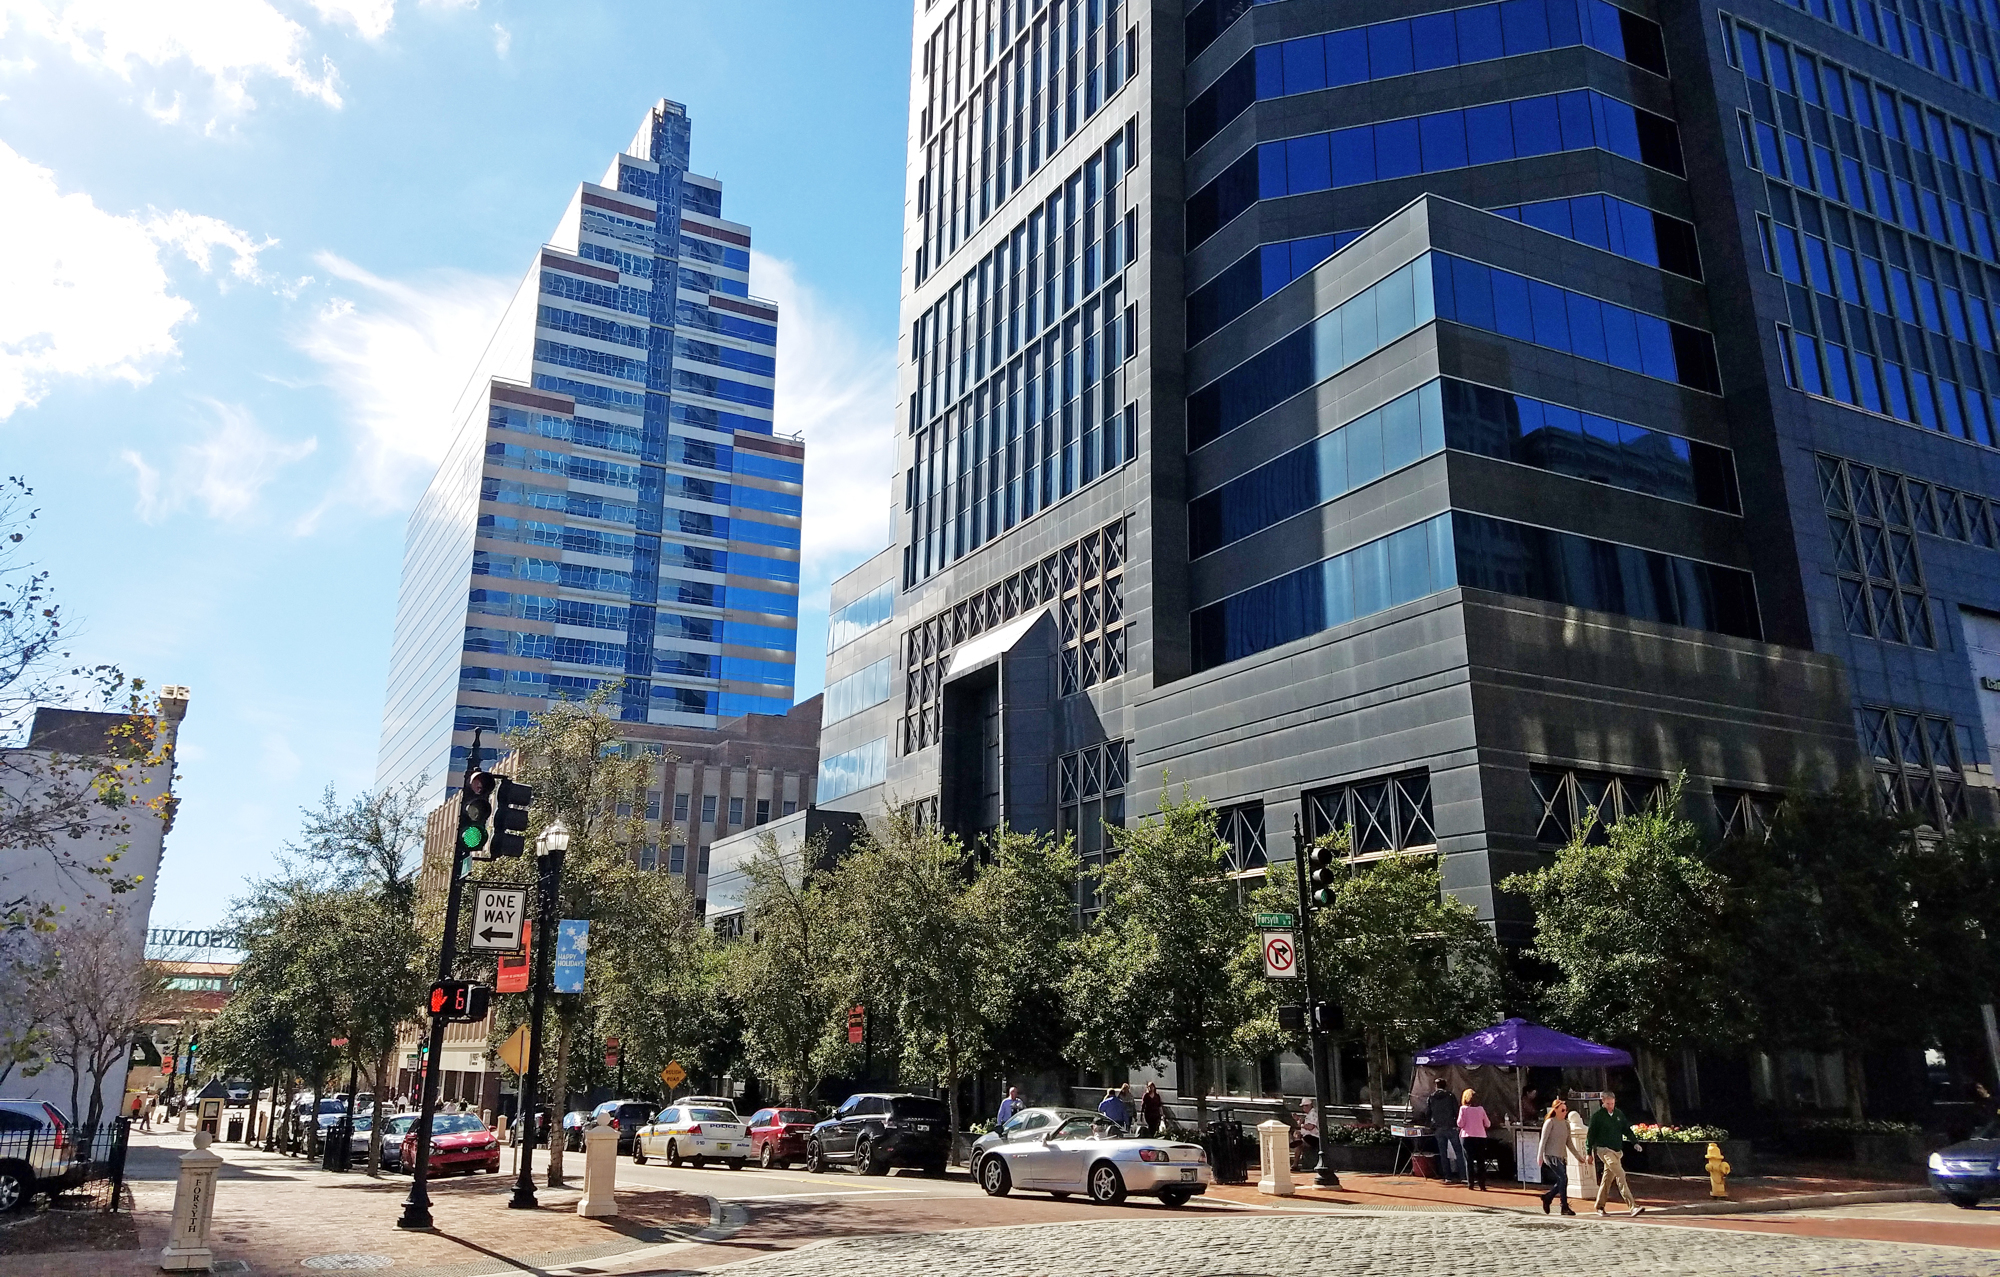 SunTrust is moving from the building bought by VyStar to the Bank of America Tower, right.